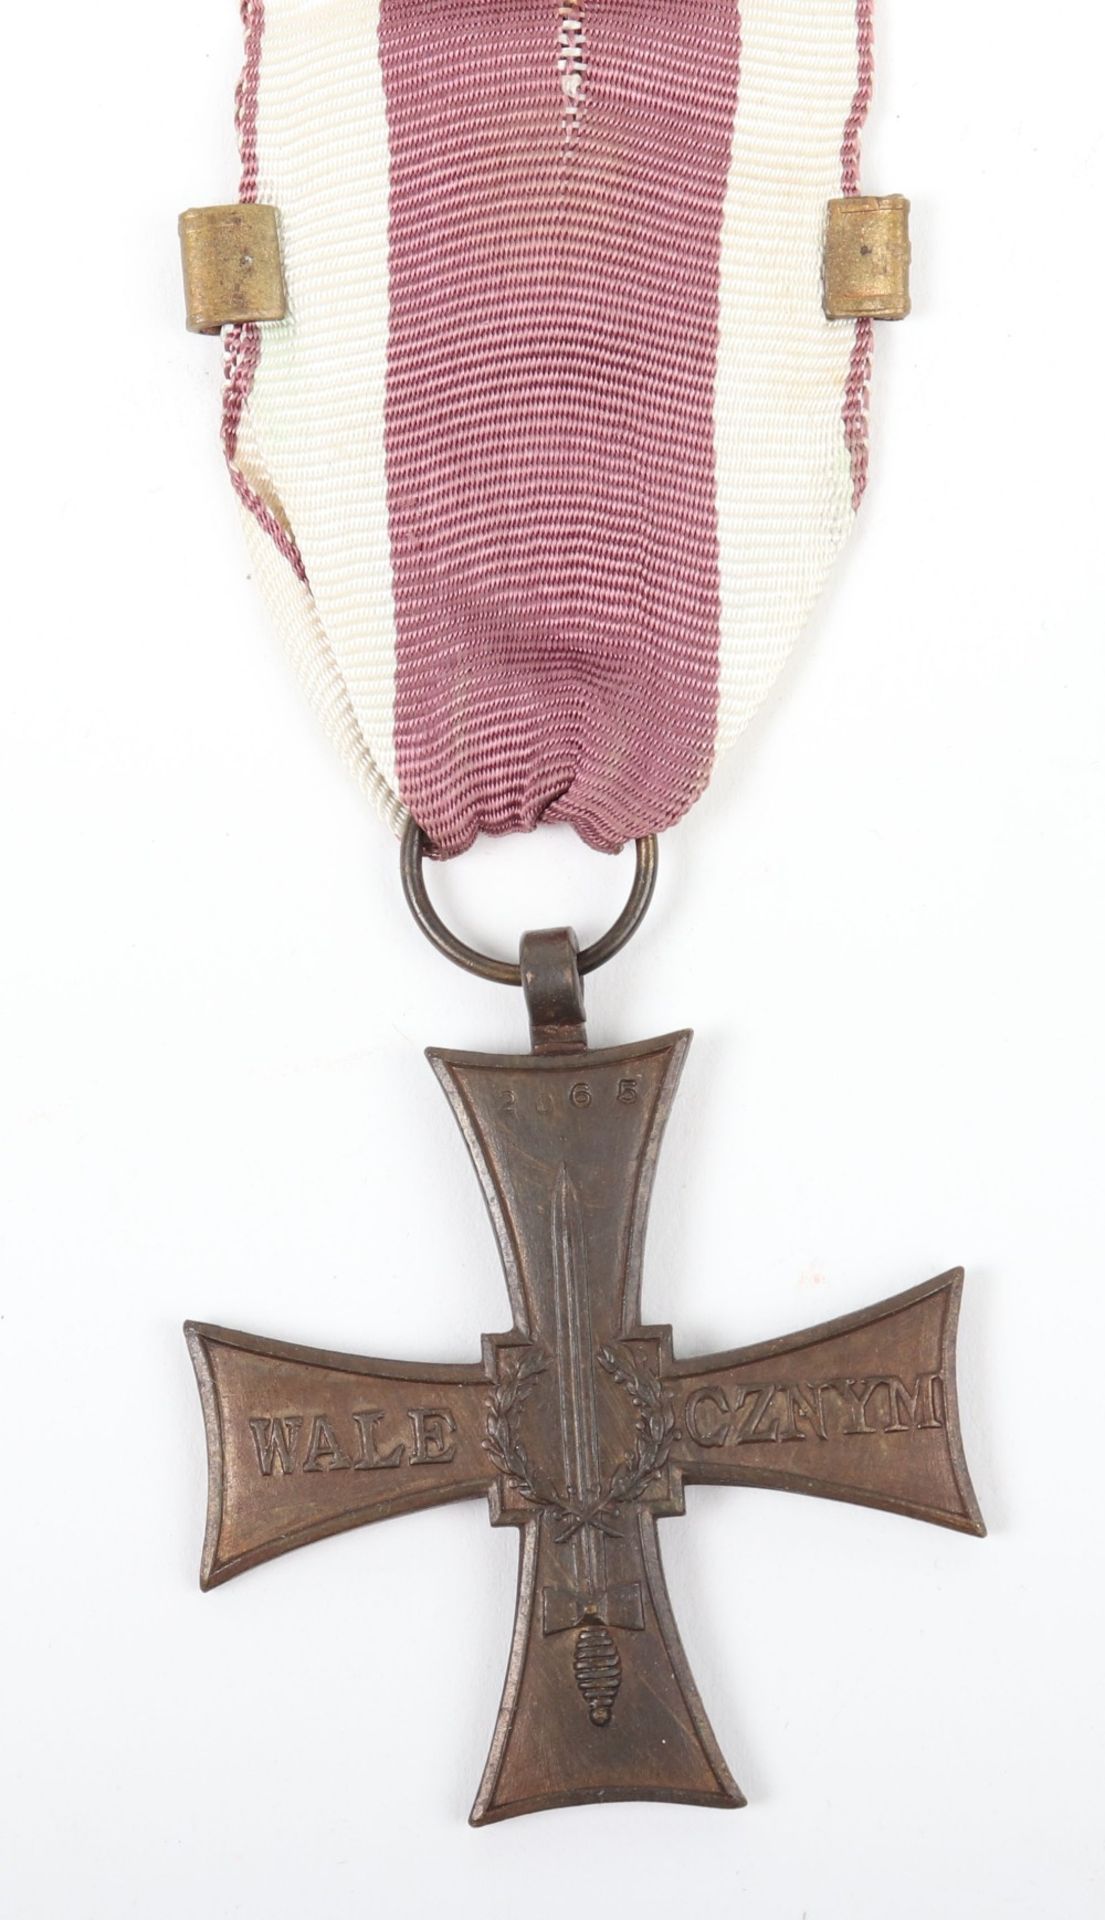 Polish Cross of Valour Medal with Second Award Bar - Image 2 of 2